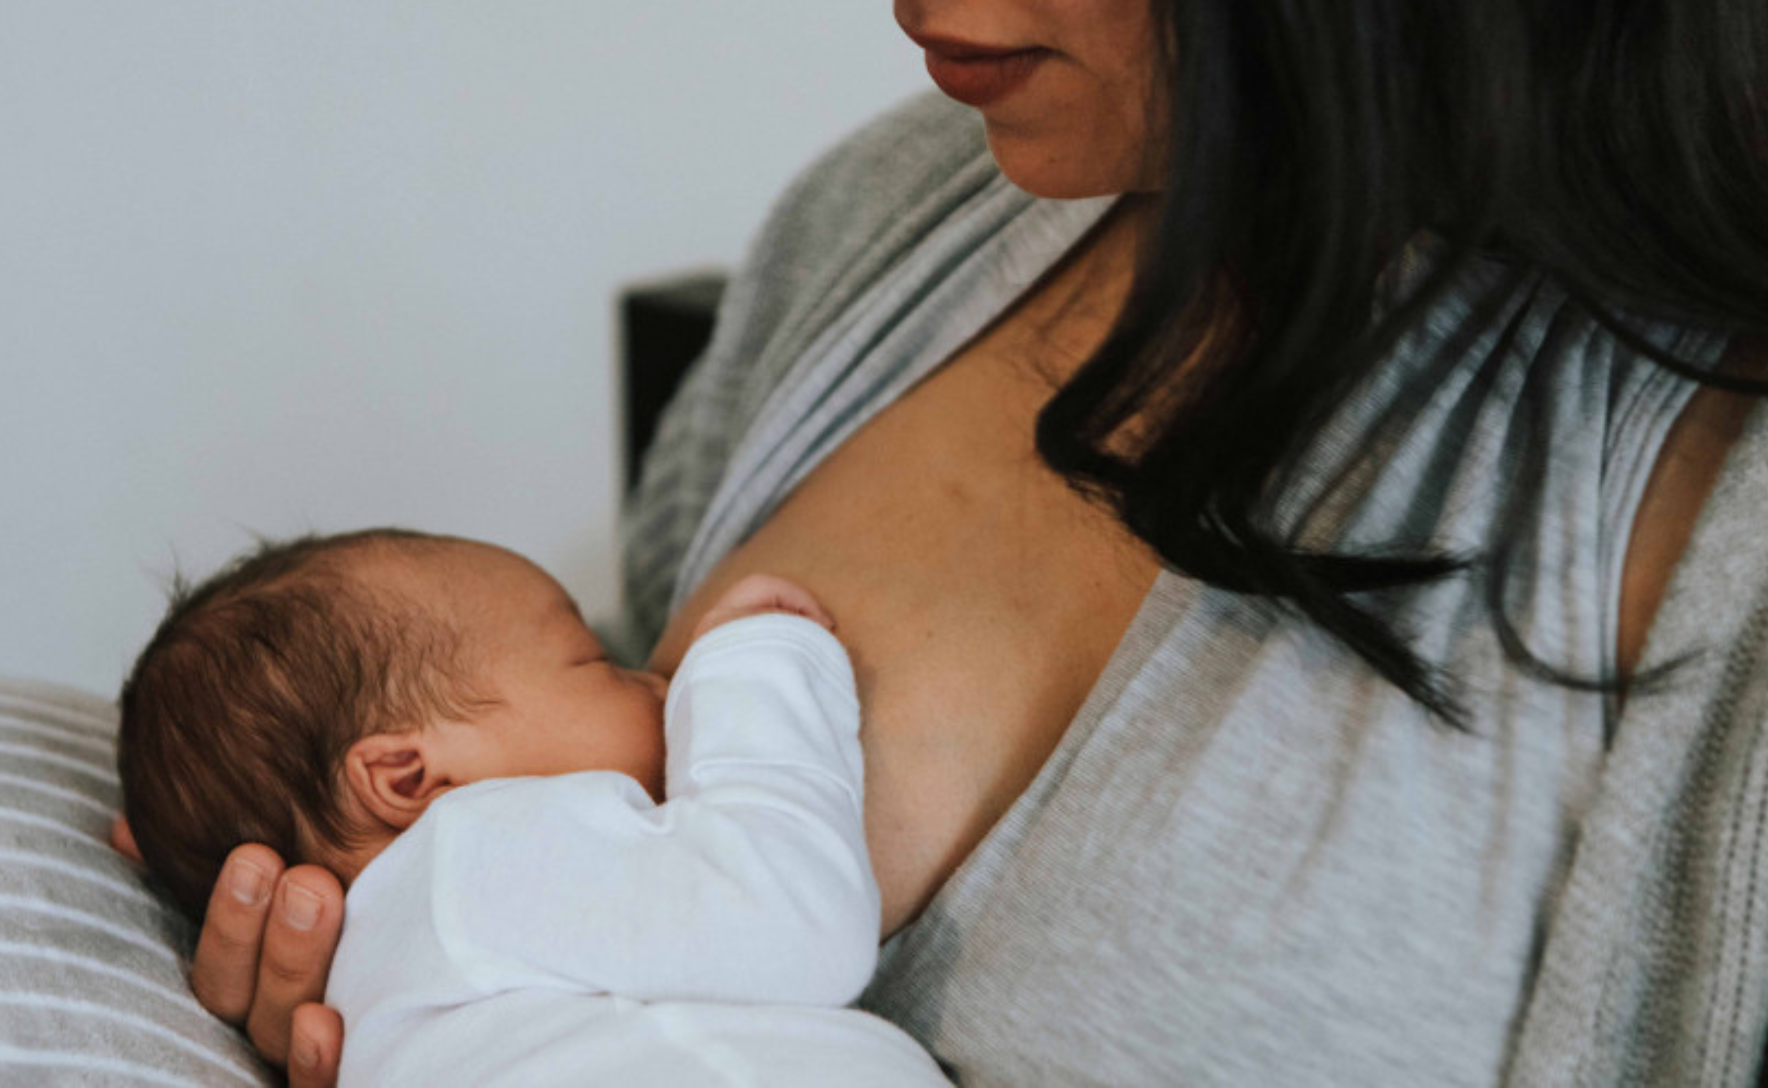 A woman holds her baby to her breast, cradling the back of their head with her hand.